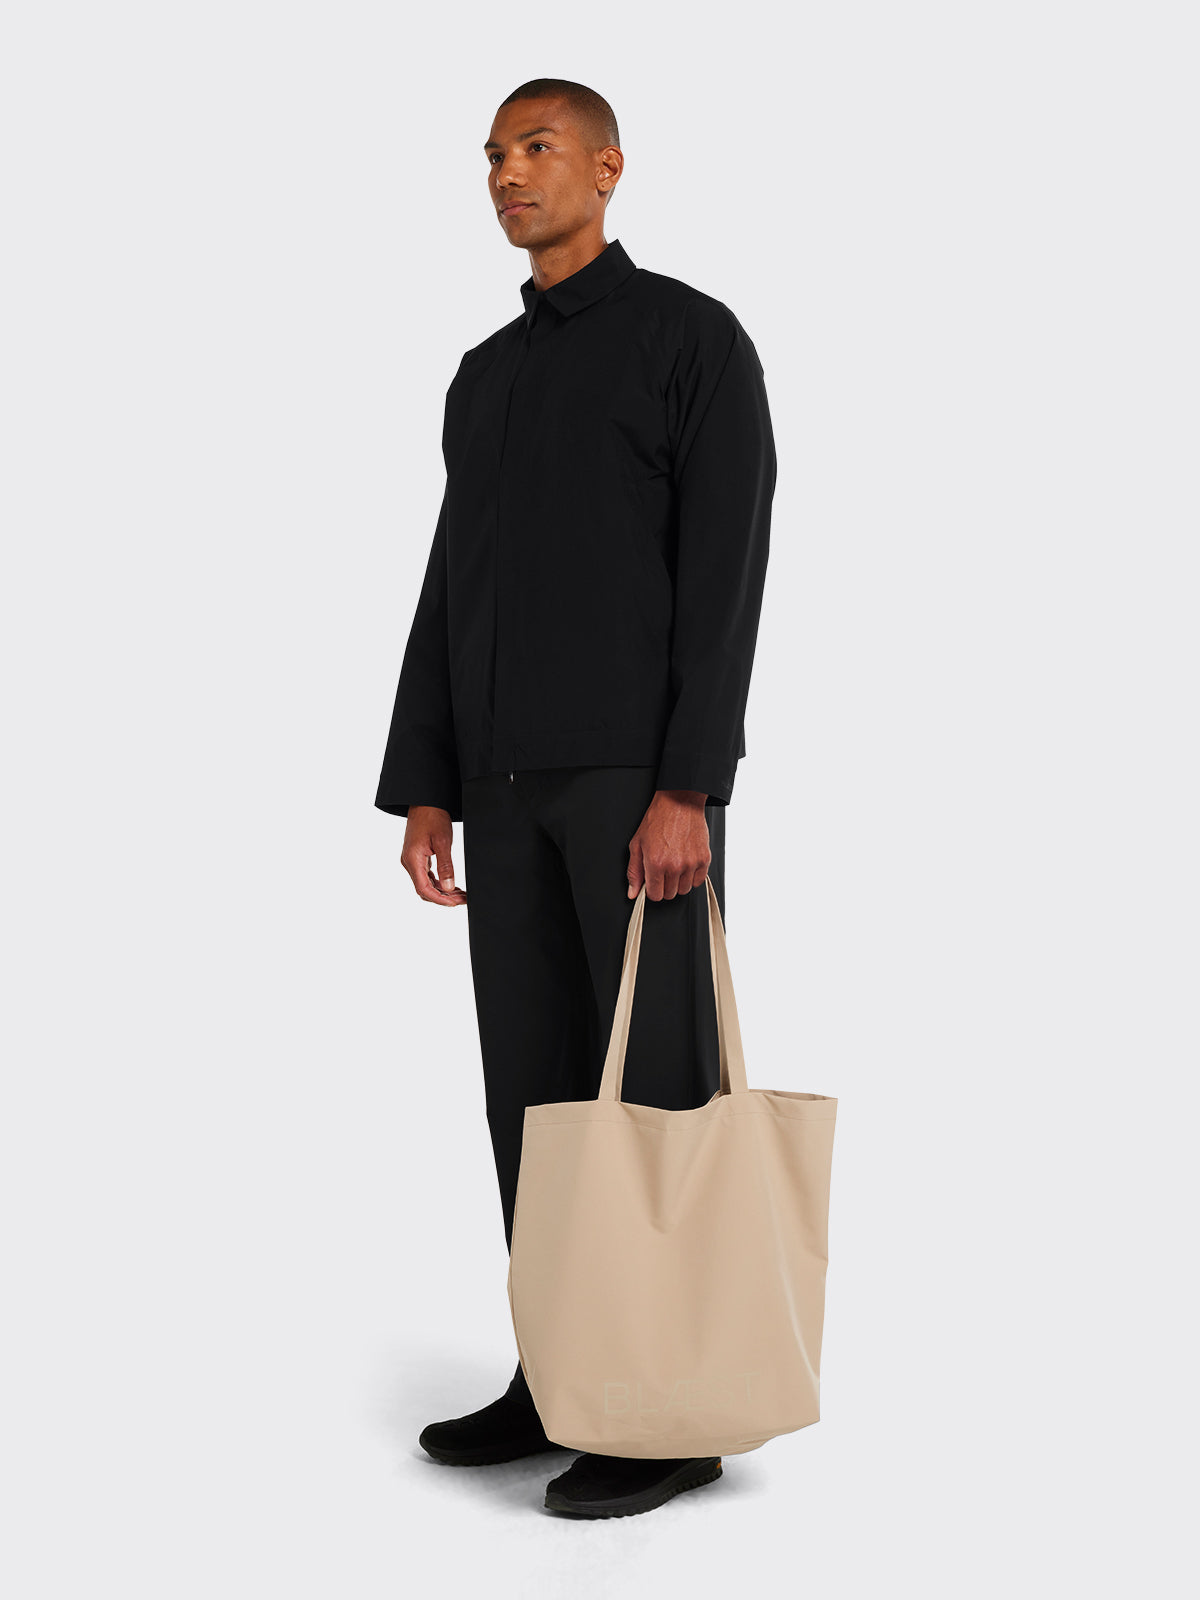 Model with Moa tote bag in Beige from Blæst